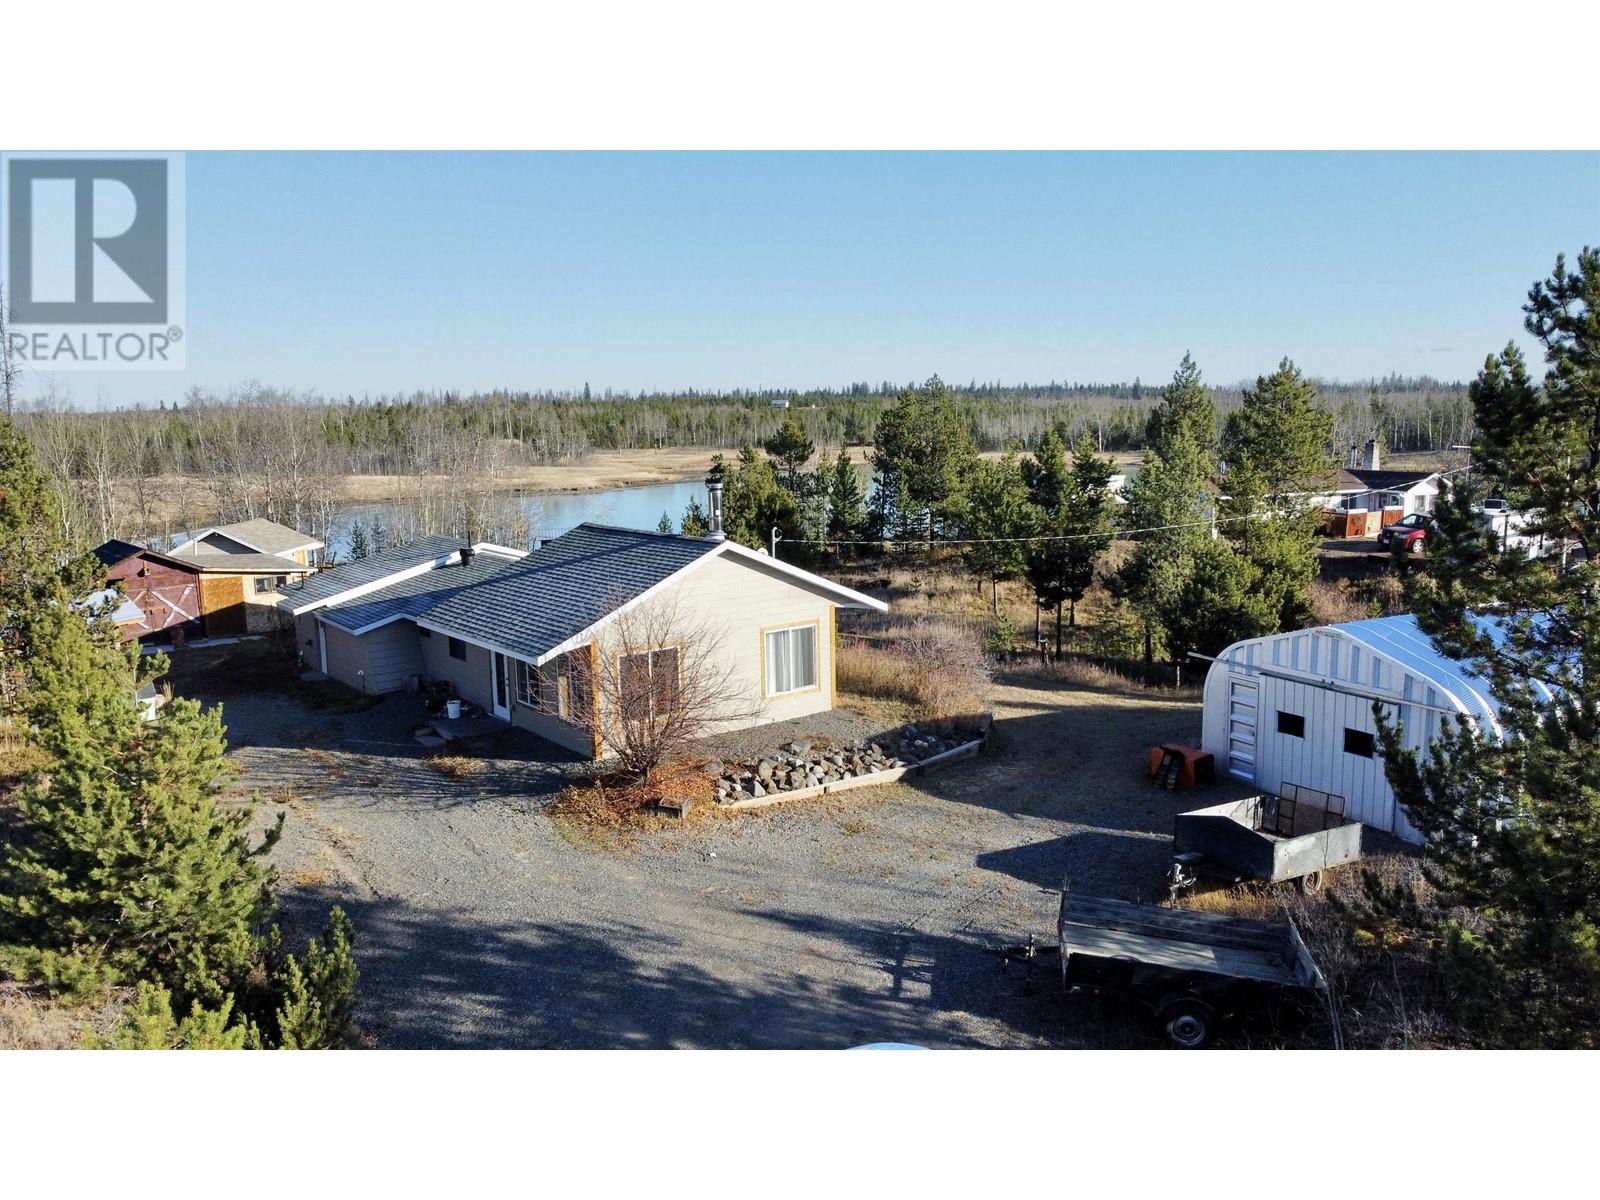 2421 WILLOW DRIVE, 70 mile house, British Columbia